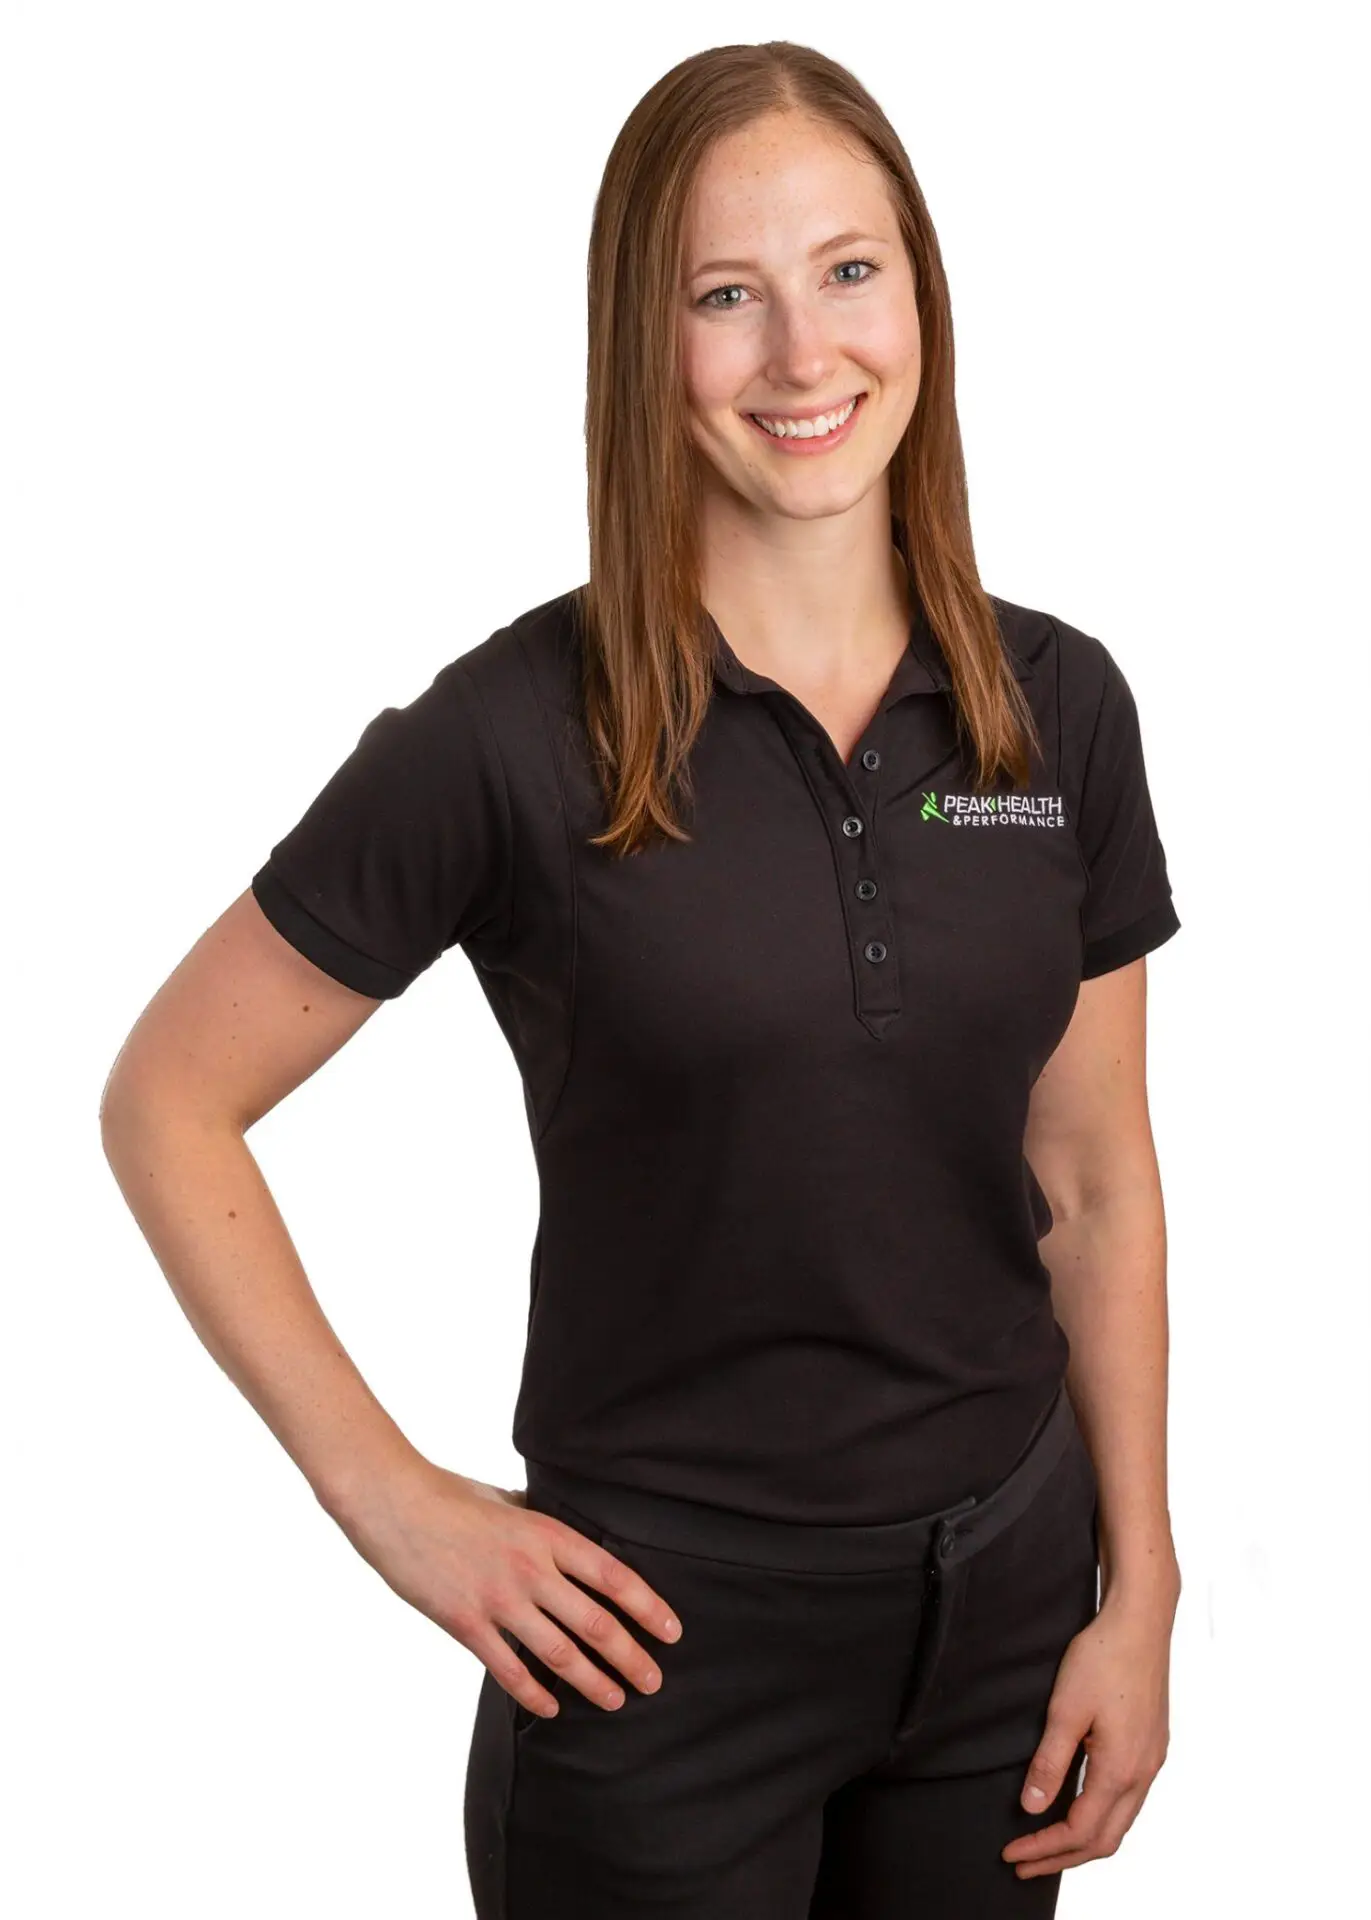 Dr. Claire Wells Chiropractor calgary 